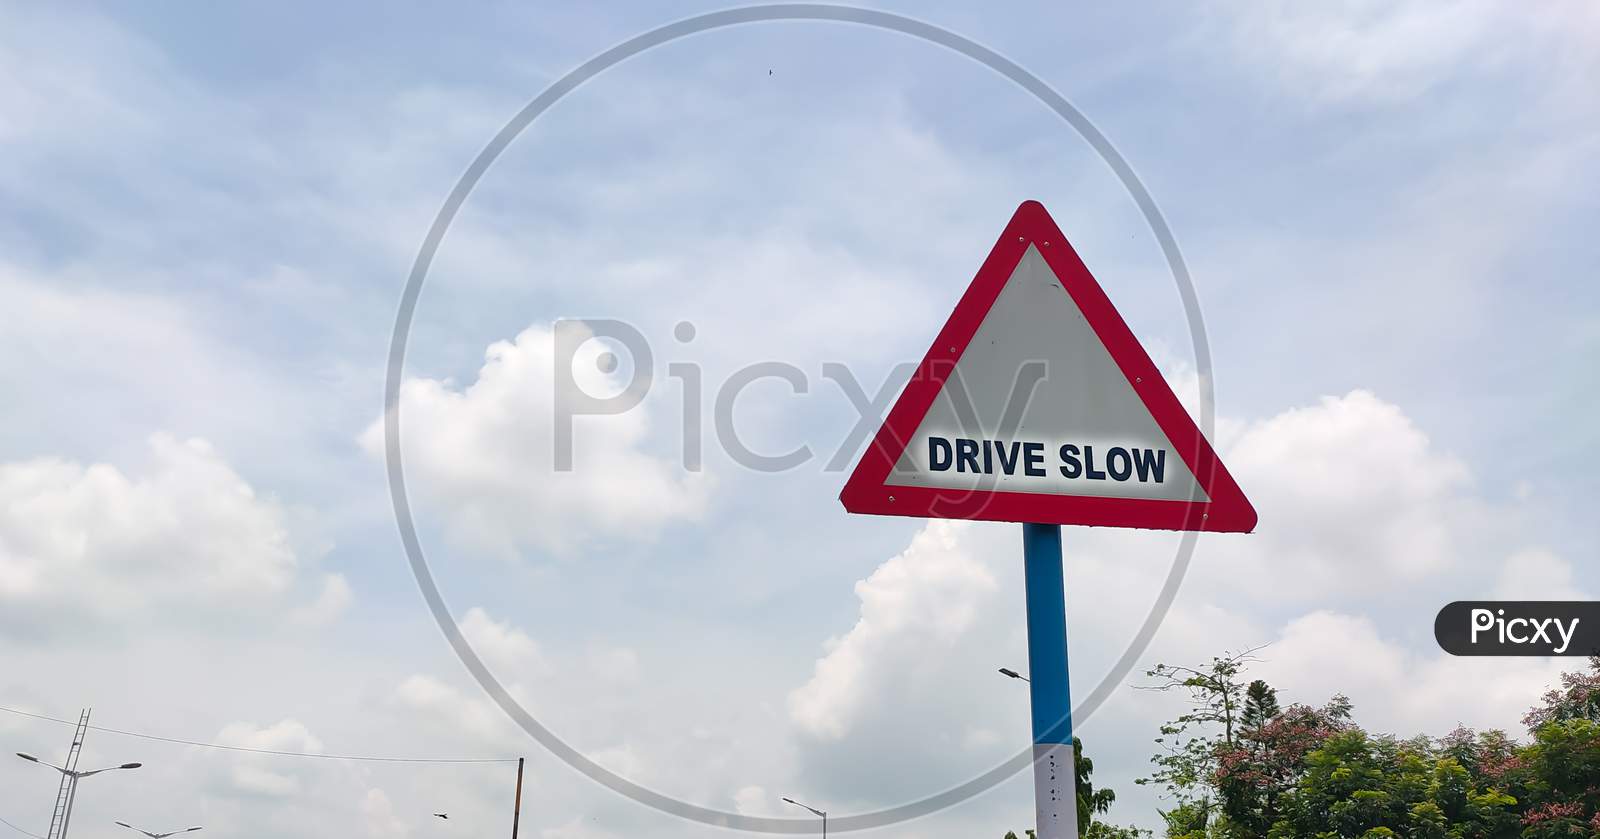 Traffic Rules And Signs Board On Road For Drive Slow For The Driver As Warning.